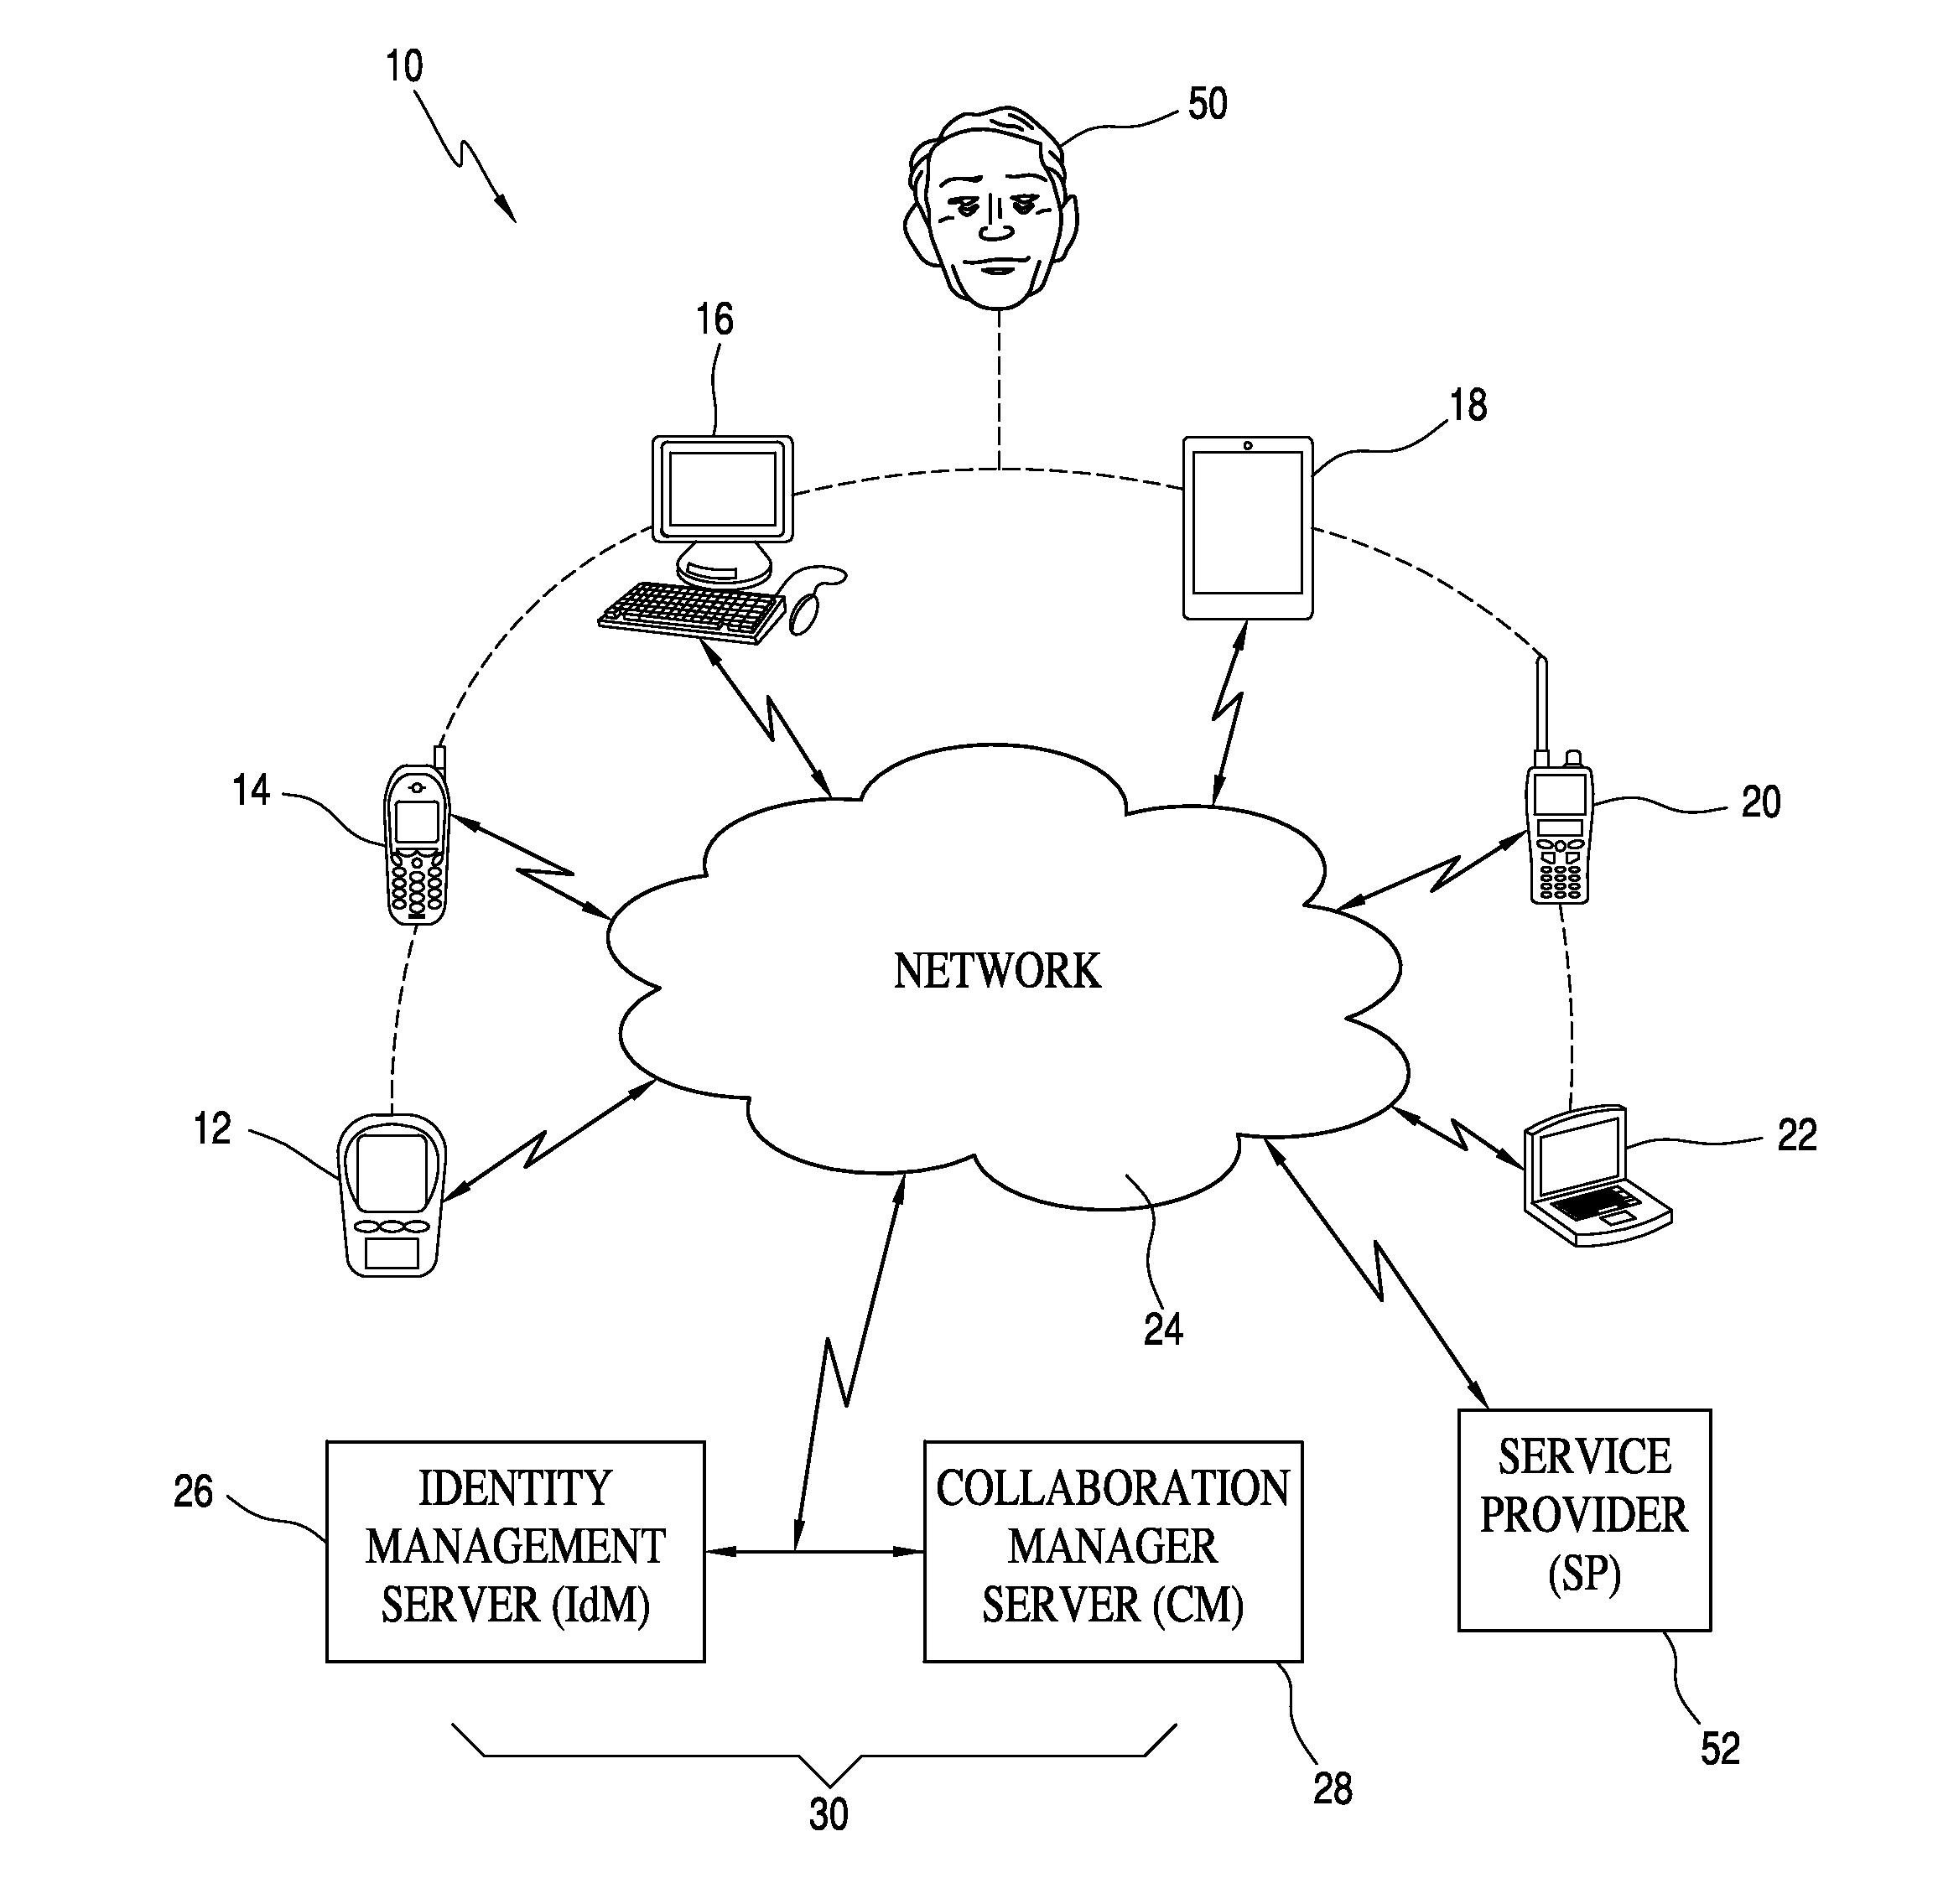 Apparatus for and method of multi-factor authentication among collaborating communication devices